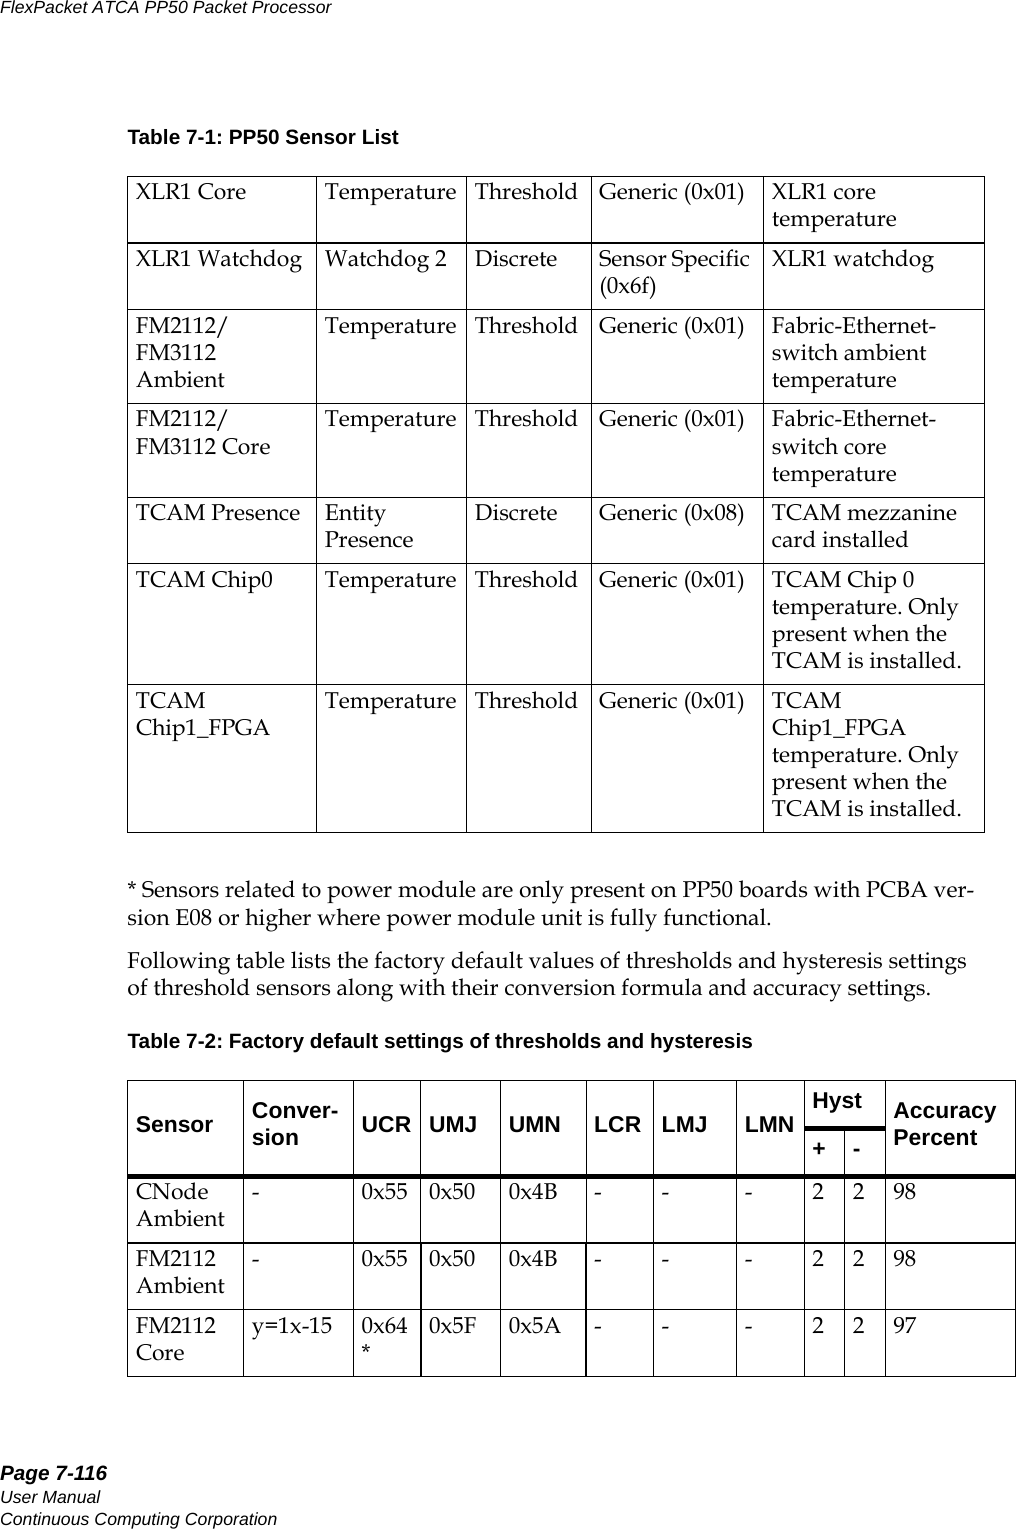 Page 7-116User ManualContinuous Computing CorporationFlexPacket ATCA PP50 Packet Processor     Preliminary* Sensors related to power module are only present on PP50 boards with PCBA ver-sion E08 or higher where power module unit is fully functional.Following table lists the factory default values of thresholds and hysteresis settings of threshold sensors along with their conversion formula and accuracy settings.XLR1 Core Temperature Threshold Generic (0x01) XLR1 core temperatureXLR1 Watchdog Watchdog 2 Discrete Sensor Specific (0x6f)XLR1 watchdogFM2112/FM3112 AmbientTemperature Threshold Generic (0x01) Fabric-Ethernet-switch ambient temperatureFM2112/FM3112 CoreTemperature Threshold Generic (0x01) Fabric-Ethernet-switch core temperatureTCAM Presence Entity PresenceDiscrete Generic (0x08) TCAM mezzanine card installedTCAM Chip0 Temperature Threshold Generic (0x01) TCAM Chip 0 temperature. Only present when the TCAM is installed.TCAM Chip1_FPGATemperature Threshold Generic (0x01) TCAM Chip1_FPGA temperature. Only present when the TCAM is installed.Table 7-2: Factory default settings of thresholds and hysteresisSensor Conver-sion UCR UMJ UMN LCR LMJ LMN Hyst Accuracy Percent+-CNode Ambient- 0x55 0x50 0x4B - - - 2 2 98FM2112 Ambient- 0x55 0x50 0x4B - - - 2 2 98FM2112 Corey=1x-15 0x64*0x5F 0x5A - - - 2 2 97Table 7-1: PP50 Sensor List